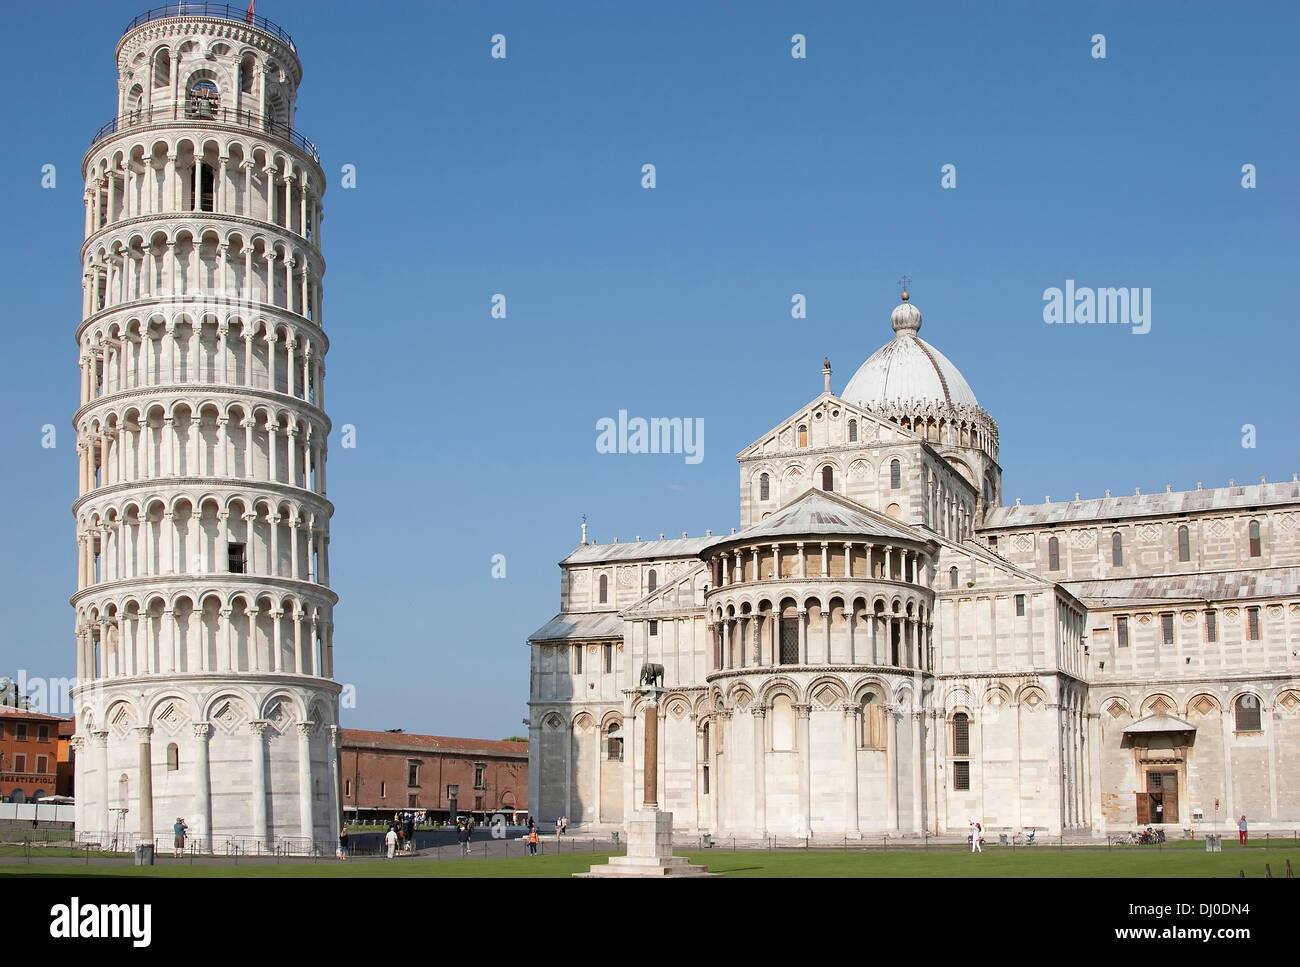 Leaning Tower of Pisa (Torre pendente di Pisa) and Cathedral (Duomo) of Pisa, Tuscany, Italy. Stock Photo